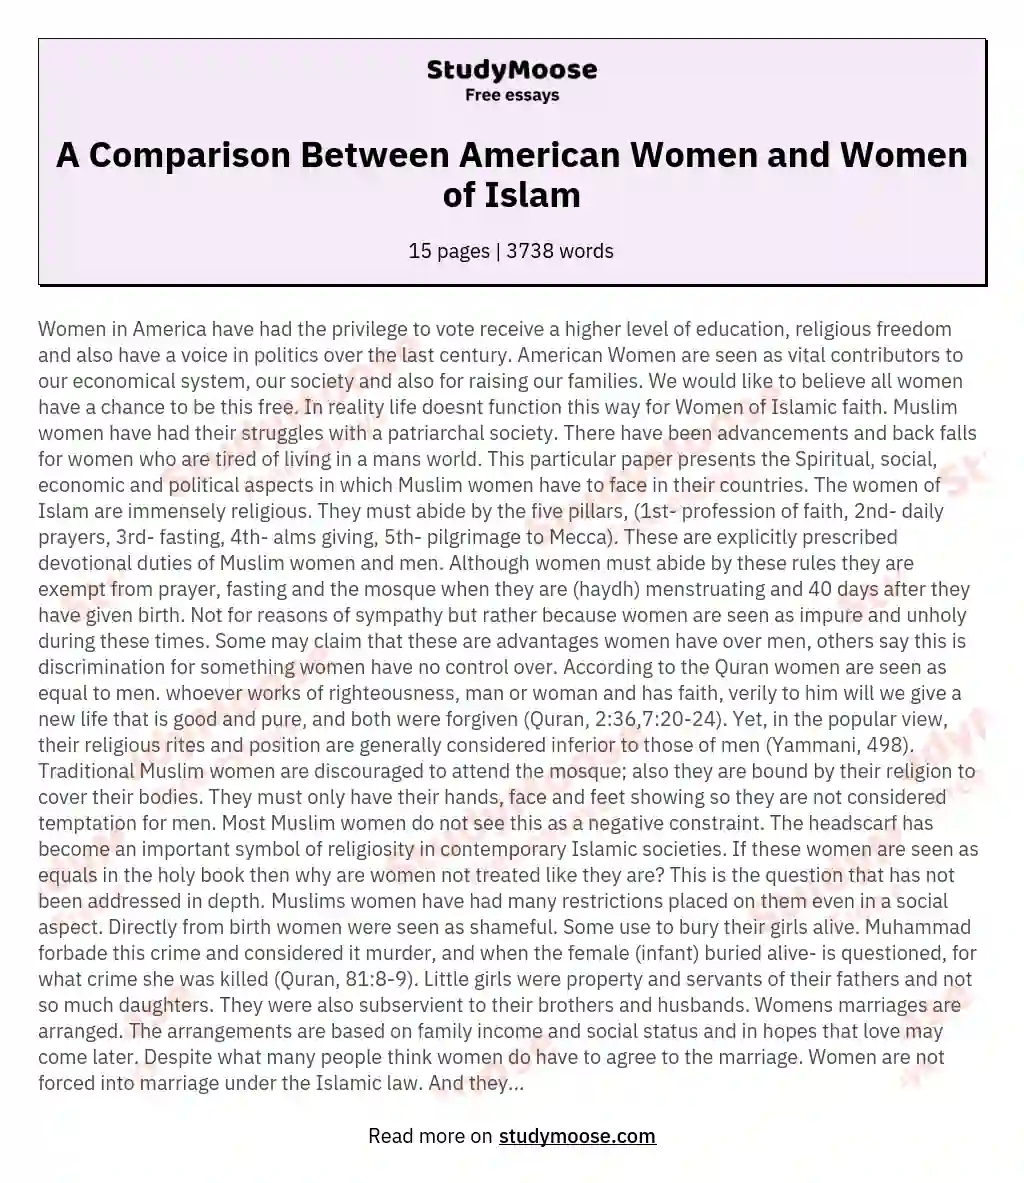 A Comparison Between American Women and Women of Islam essay